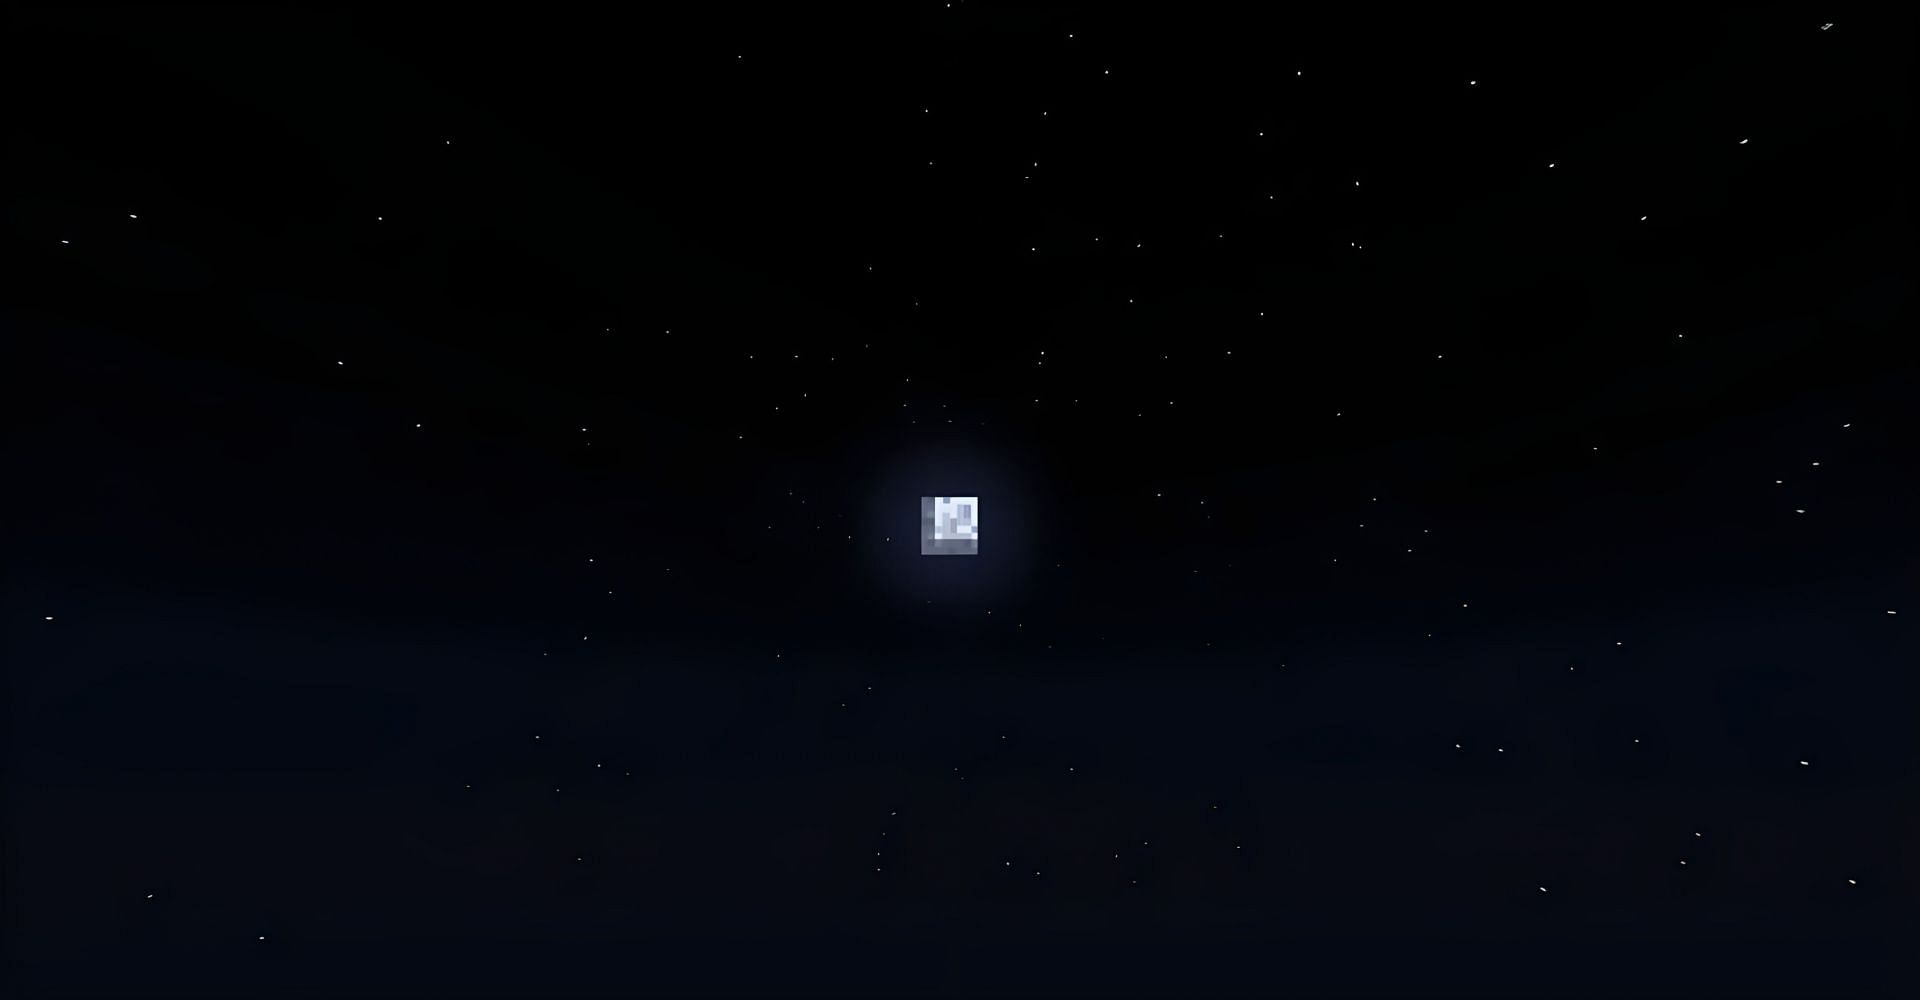 Space themed Minecraft servers are extremely entertaining (Image via Mojang)